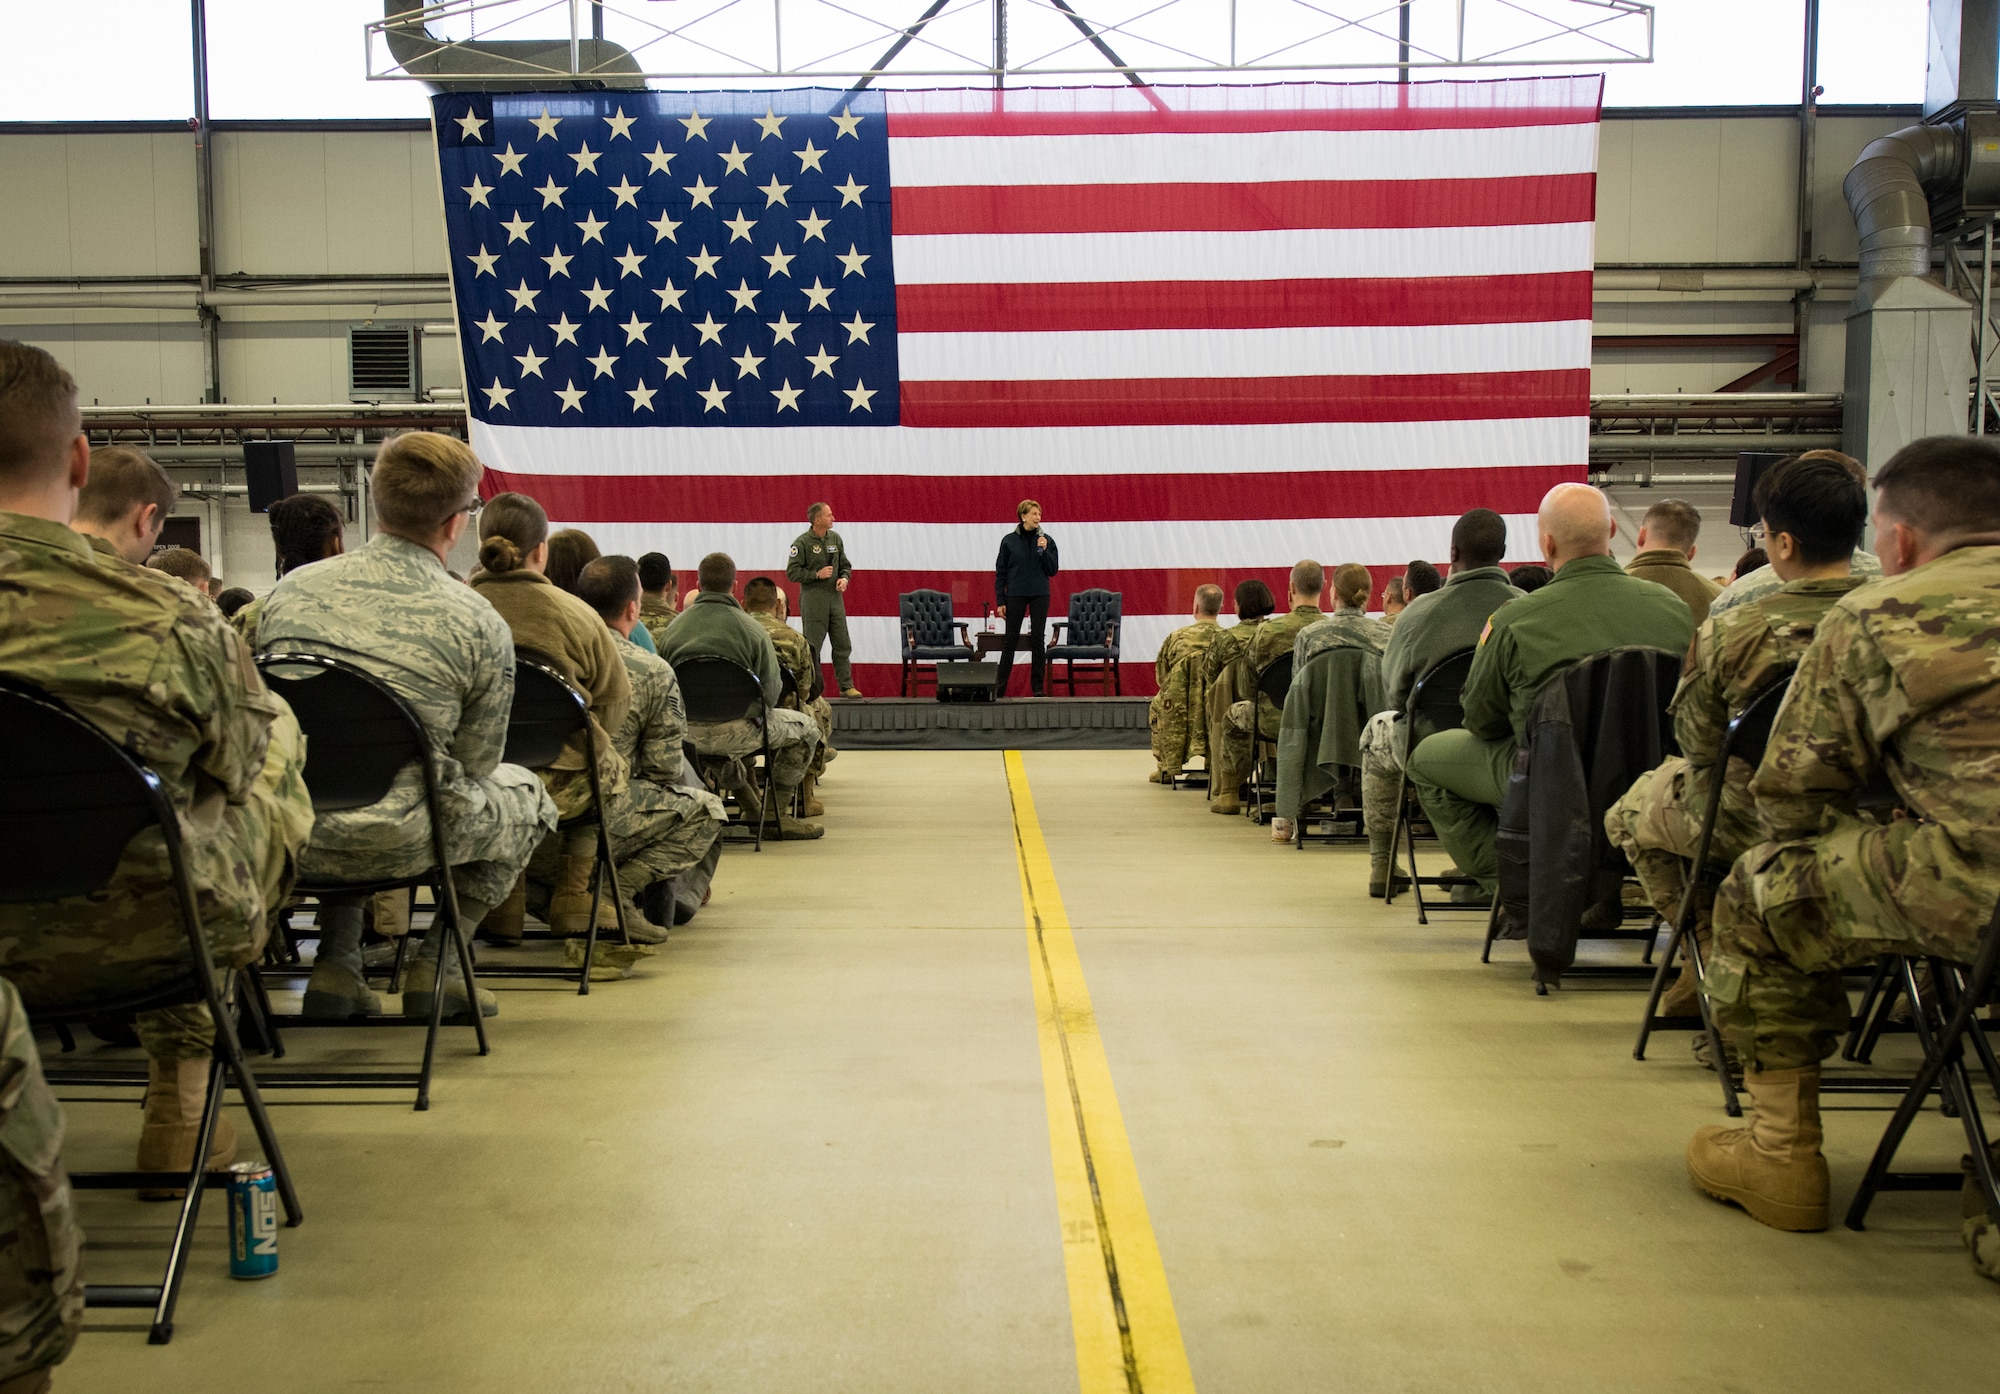 Secretary of the Air Force Barbara Barrett, right, and Air Force Chief of Staff Gen. David L. Goldfein answer questions from Airmen during a town hall on Ramstein Air Base, Germany, Nov. 22, 2019.